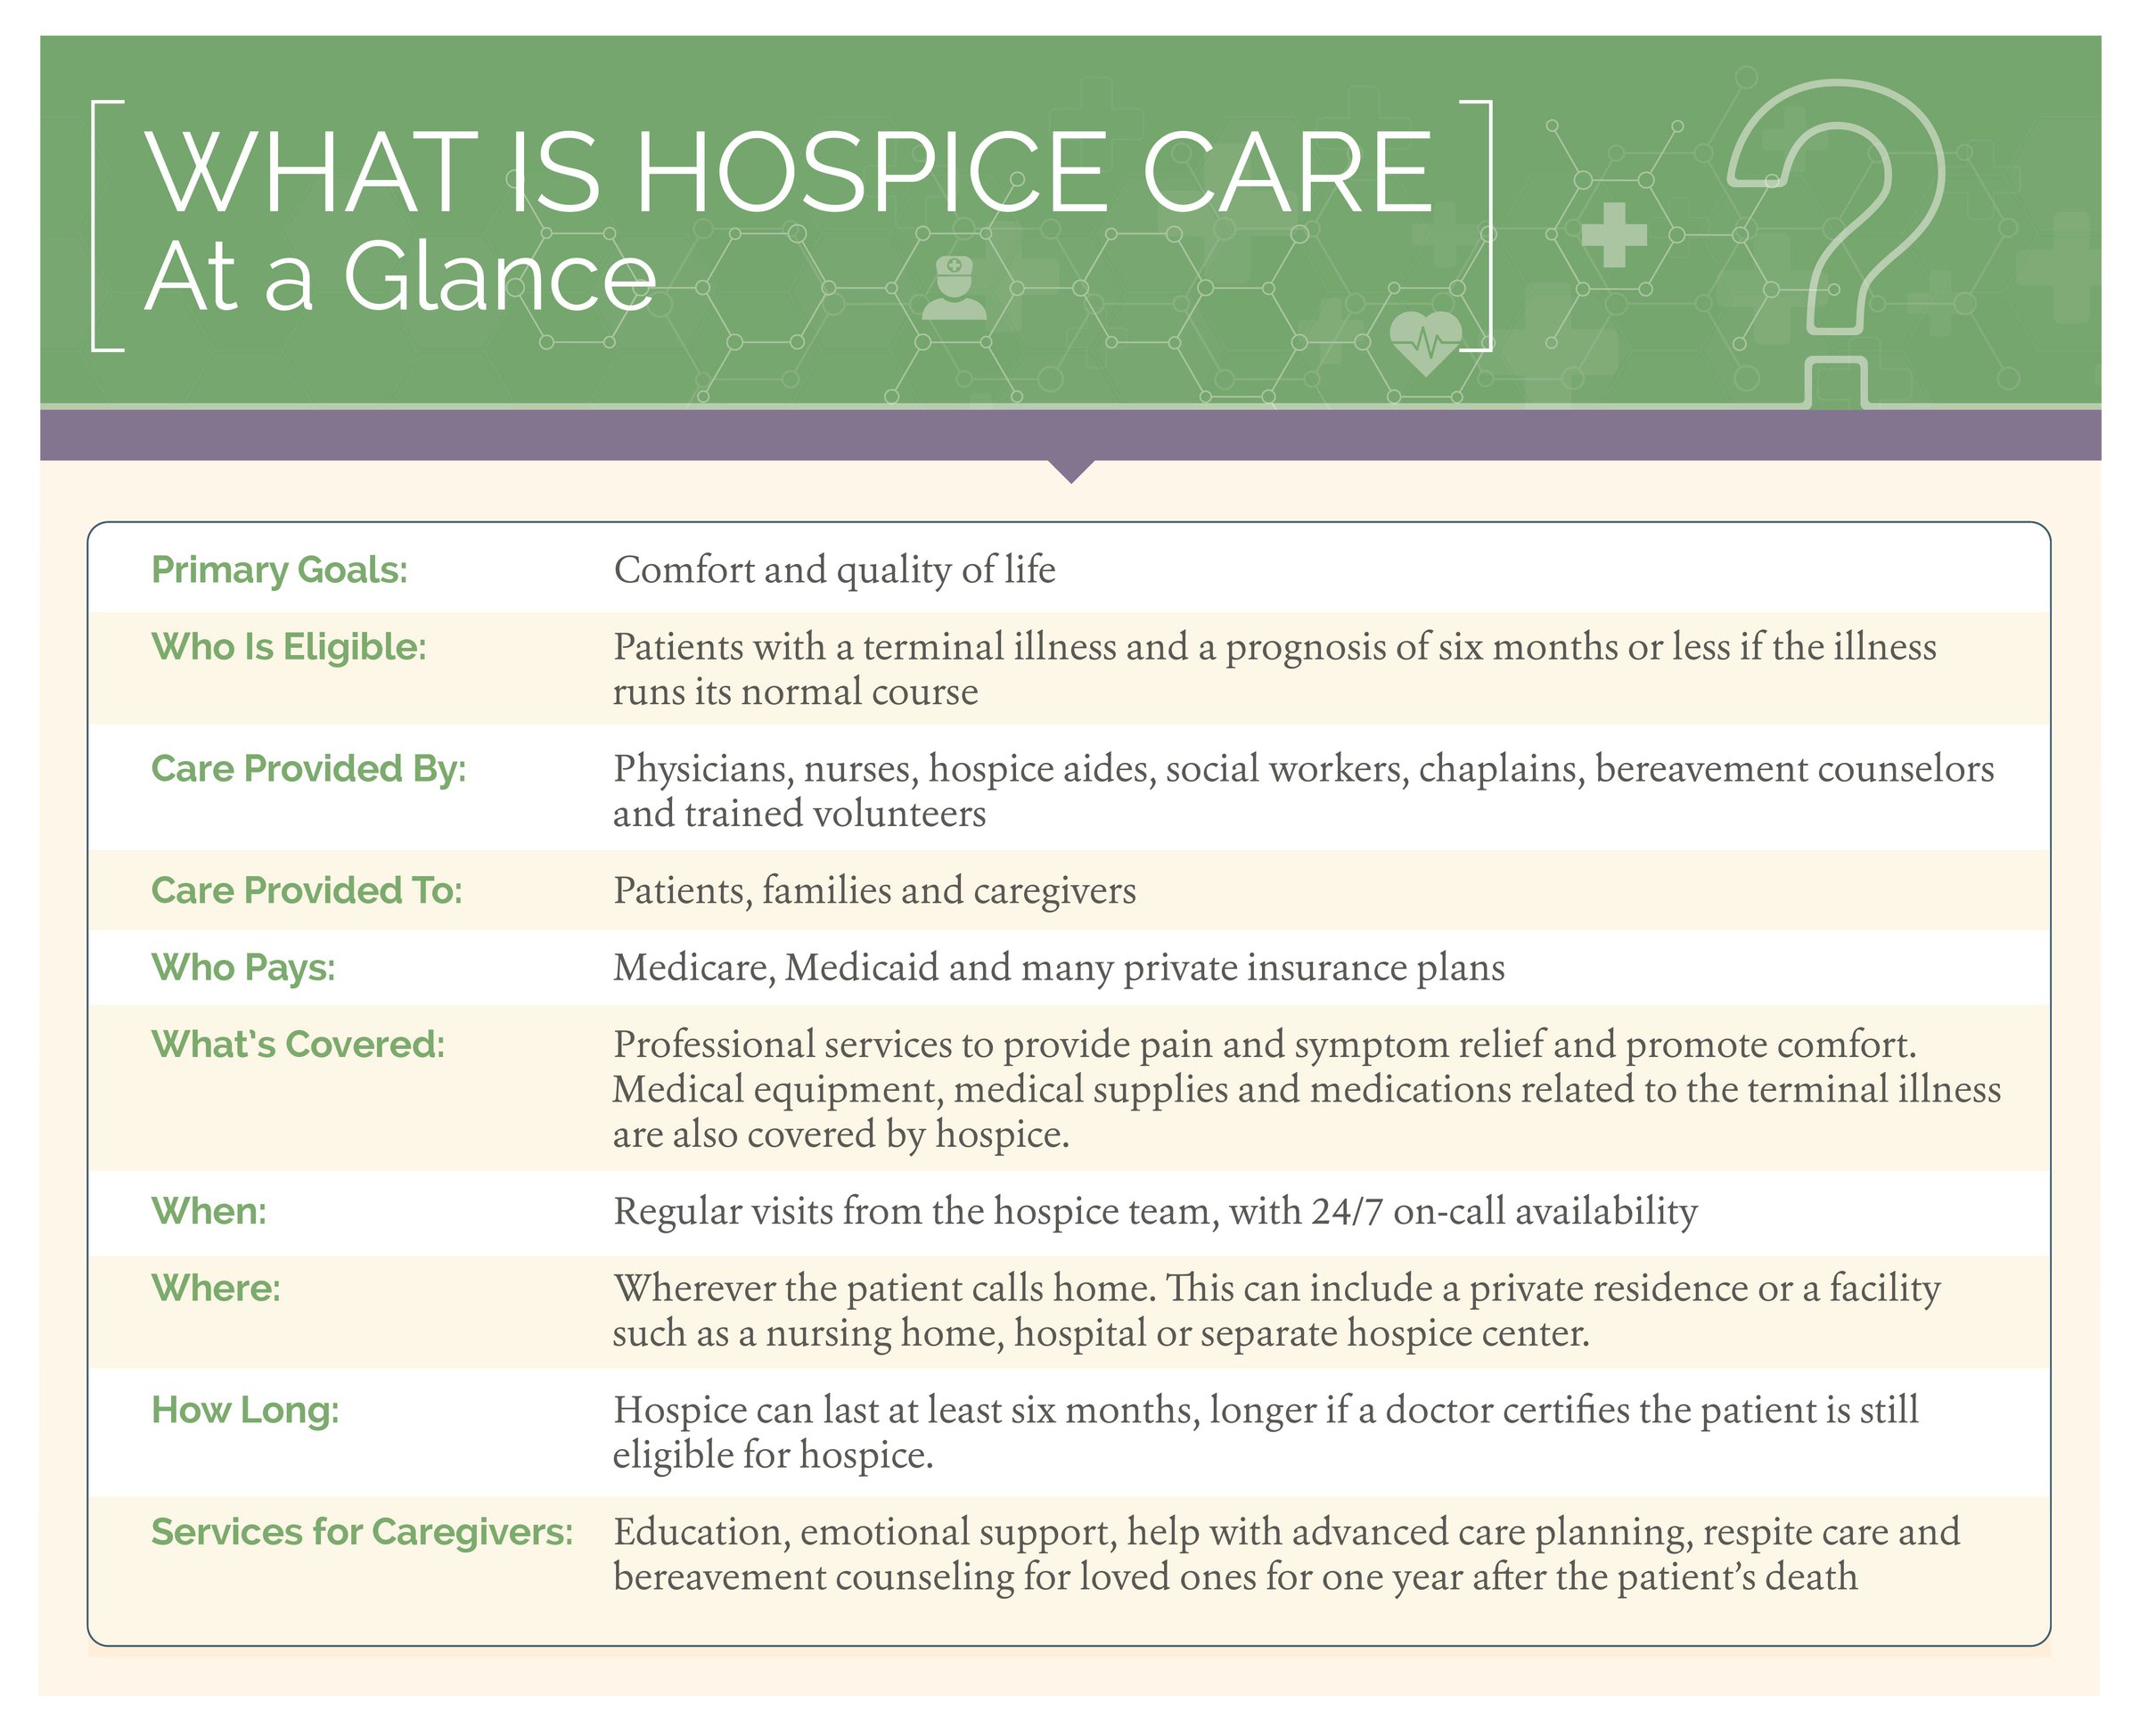 What Is Hospice Care and How Does It Enhance Quality of Life?